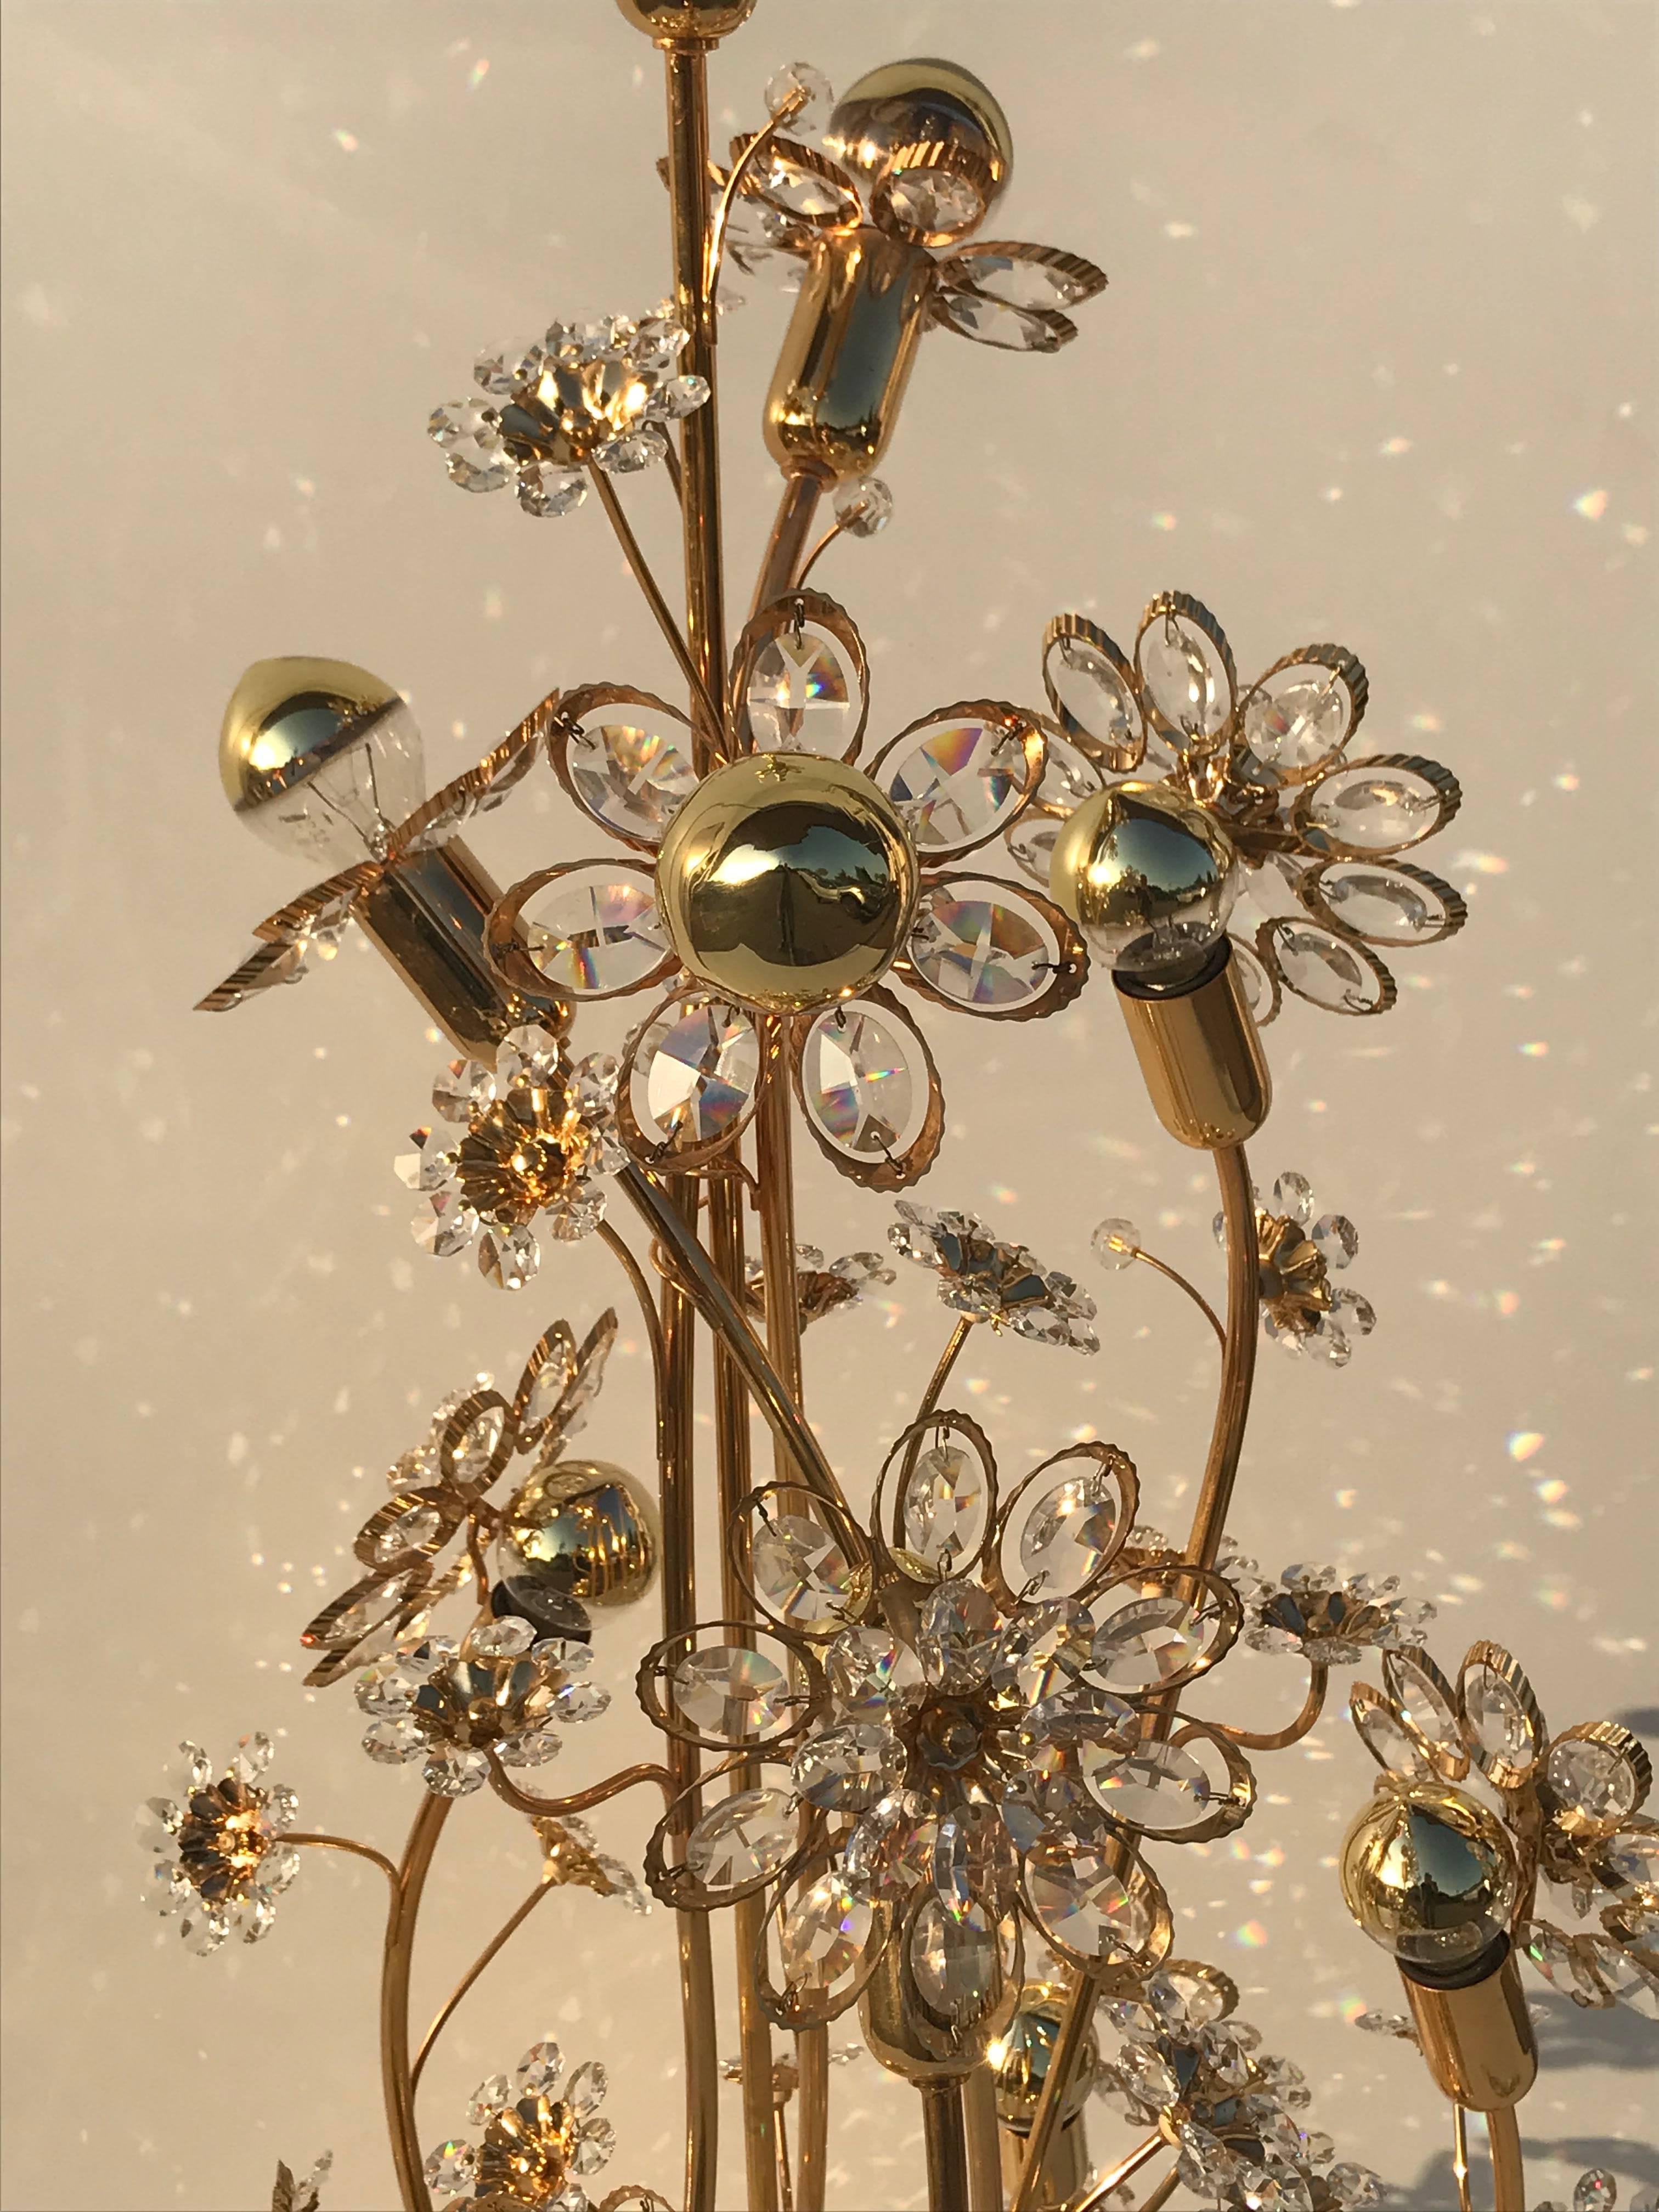 Gilt Enchanting Illuminated Crystal Flower and Brass Floor Lamp by Palwa